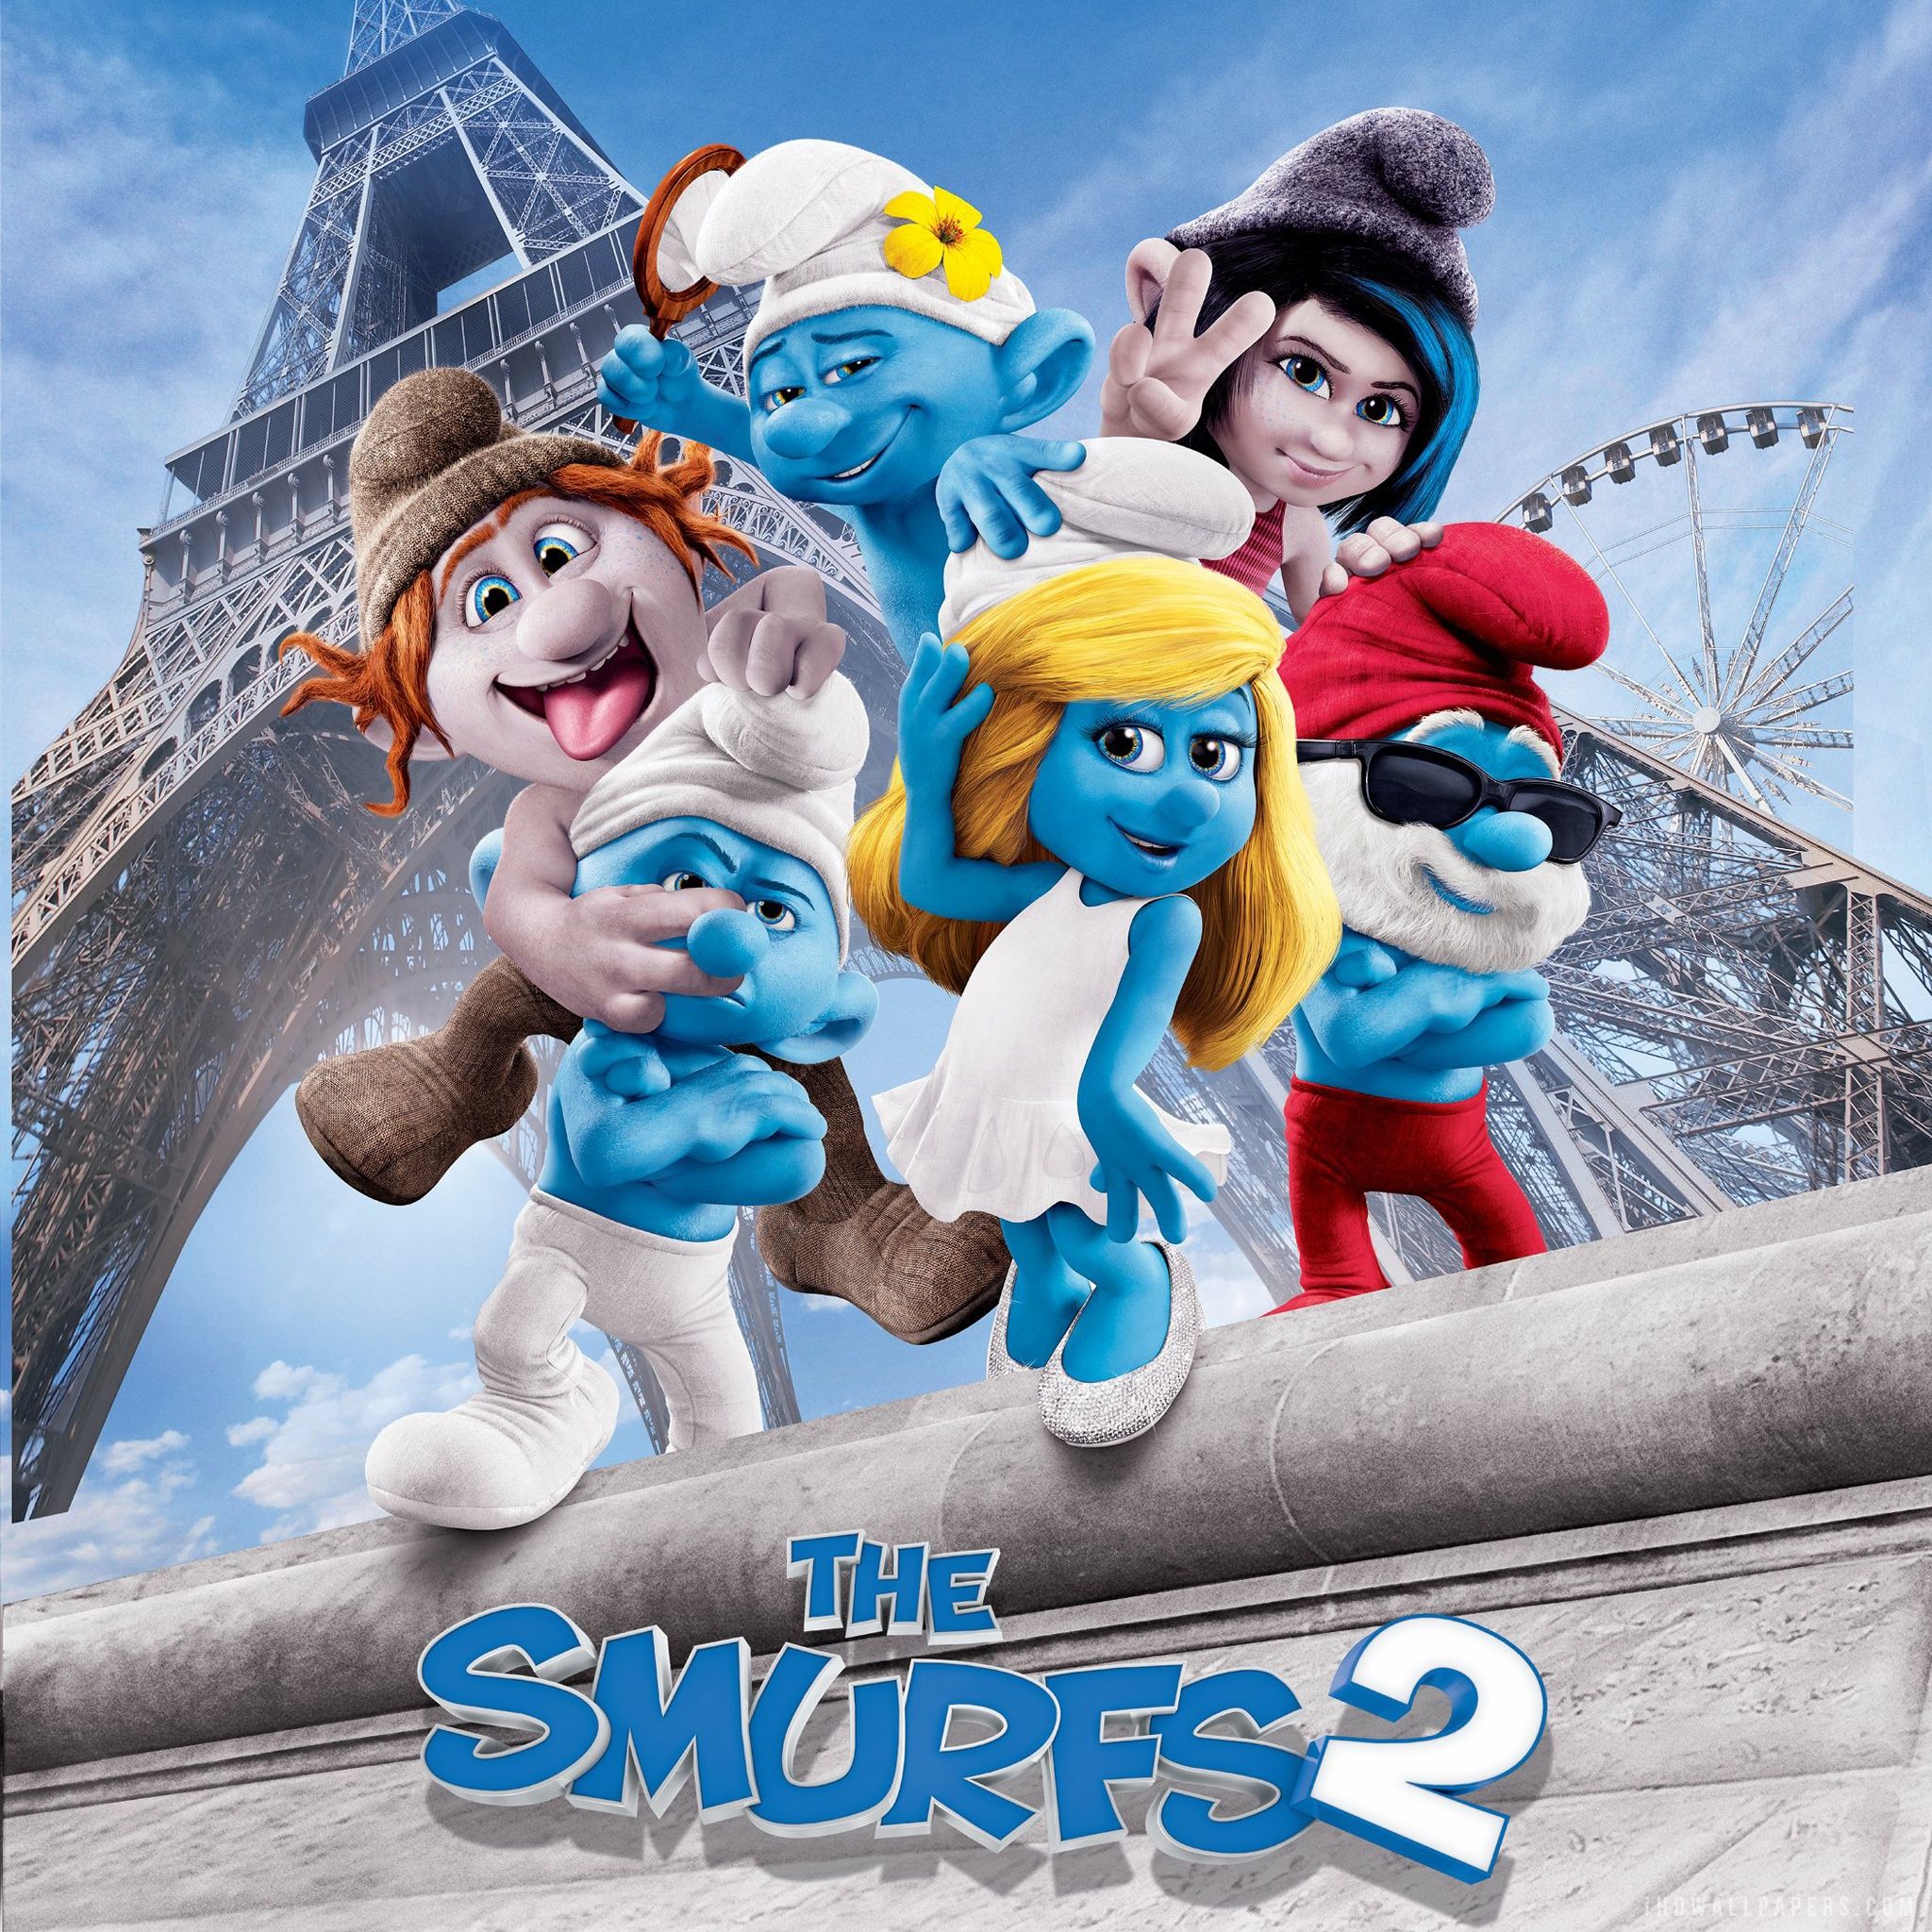 The Smurfs 2 HD Wallpaper - iHD Wallpapers